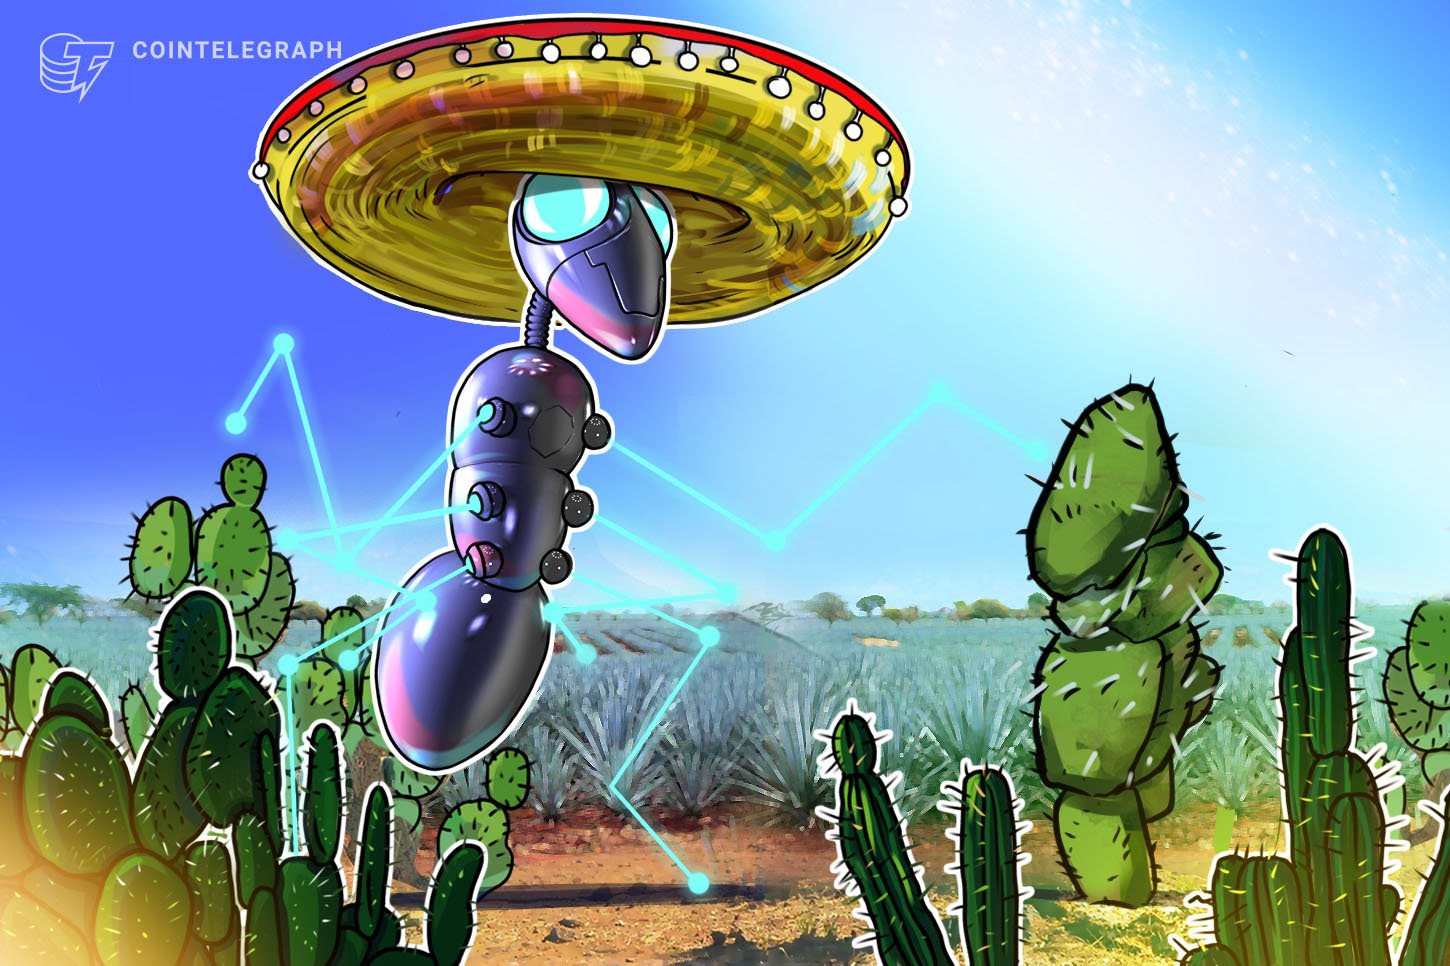 Mexico’s Blockchain Sector Grows 90% in 2 Years Regardless of COVID-19